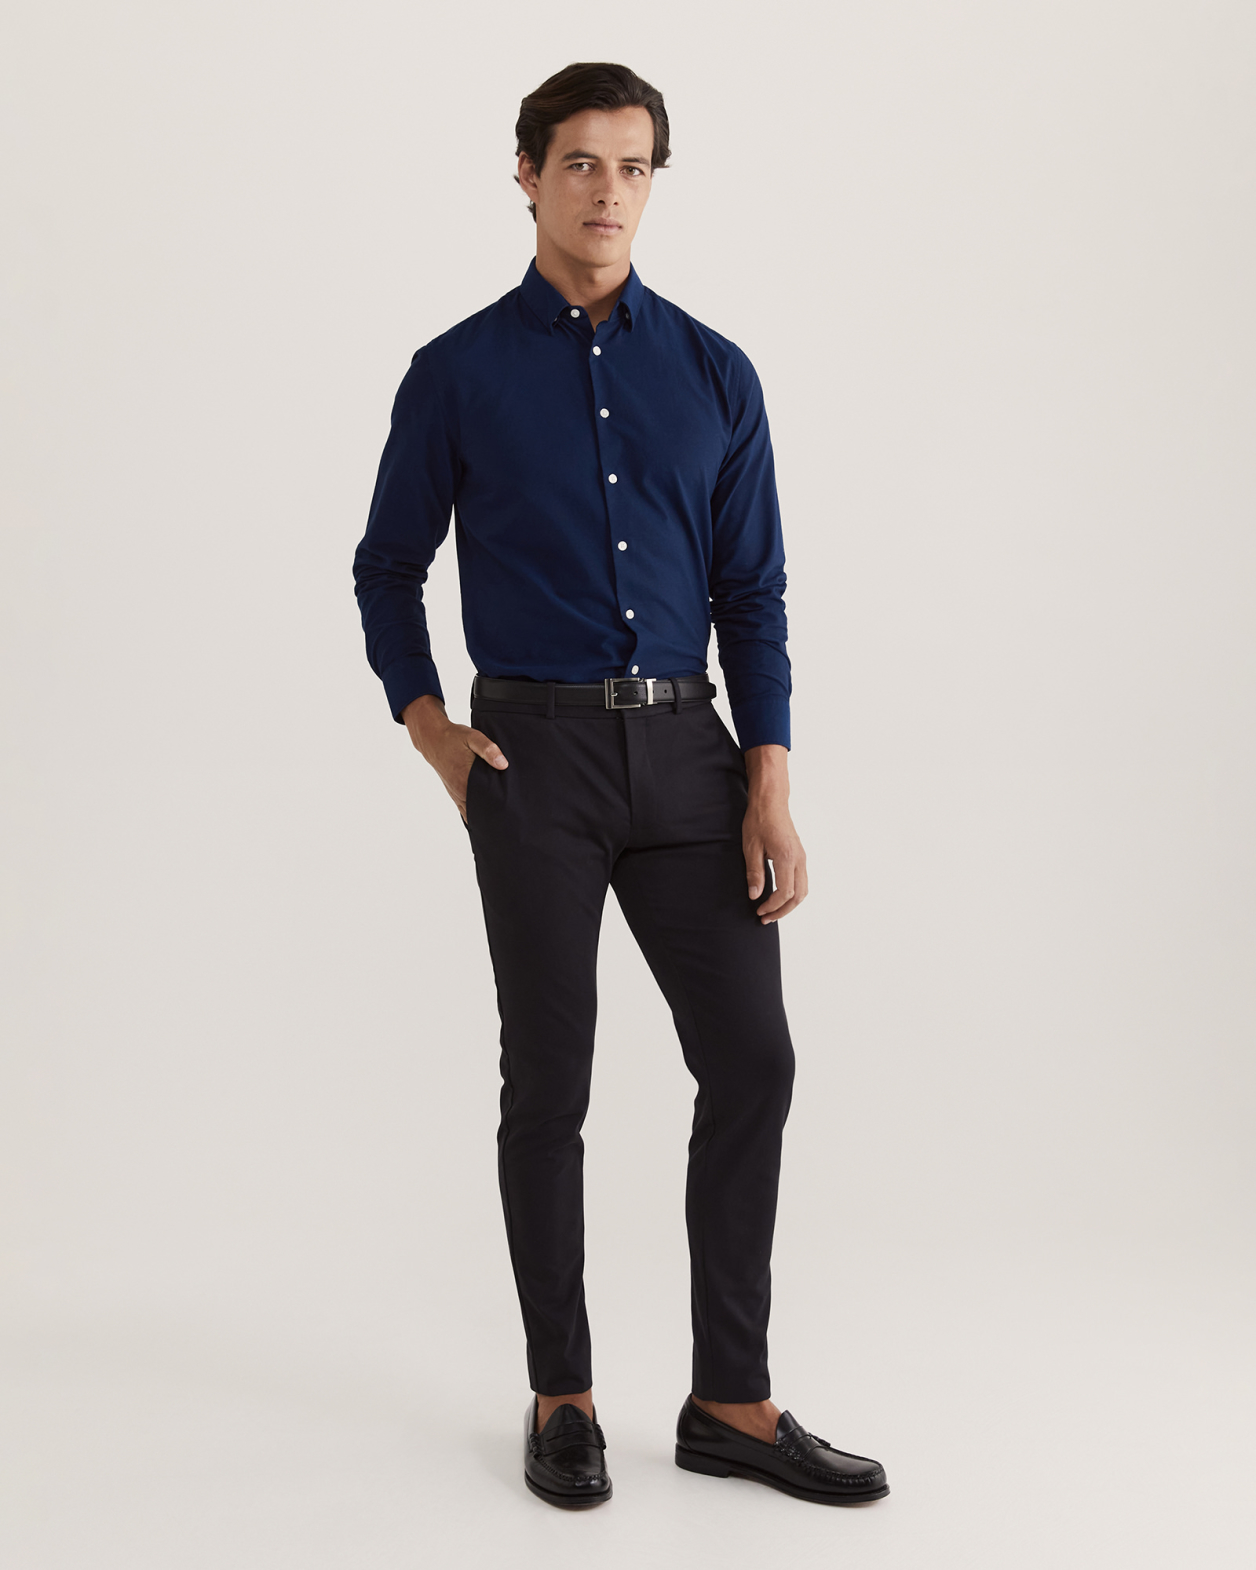 Christopher Oxford Long Sleeve Classic Shirt in NAVY